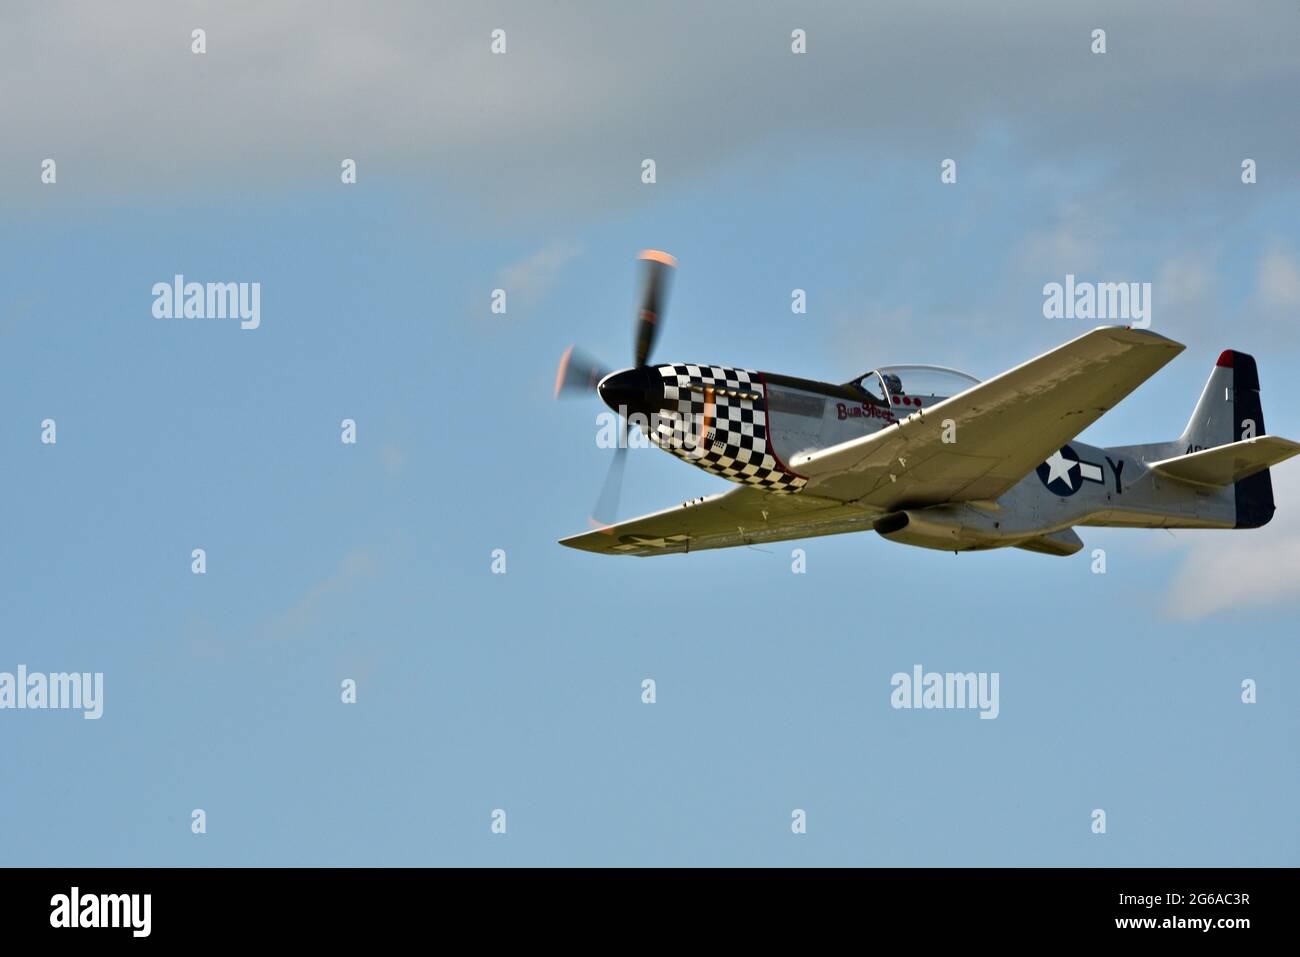 Second World War P-51 Mustang airborne and making high speed passes at the EAA Fly-In (AirVenture), Oshkosh, Wisconsin, USA Stock Photo